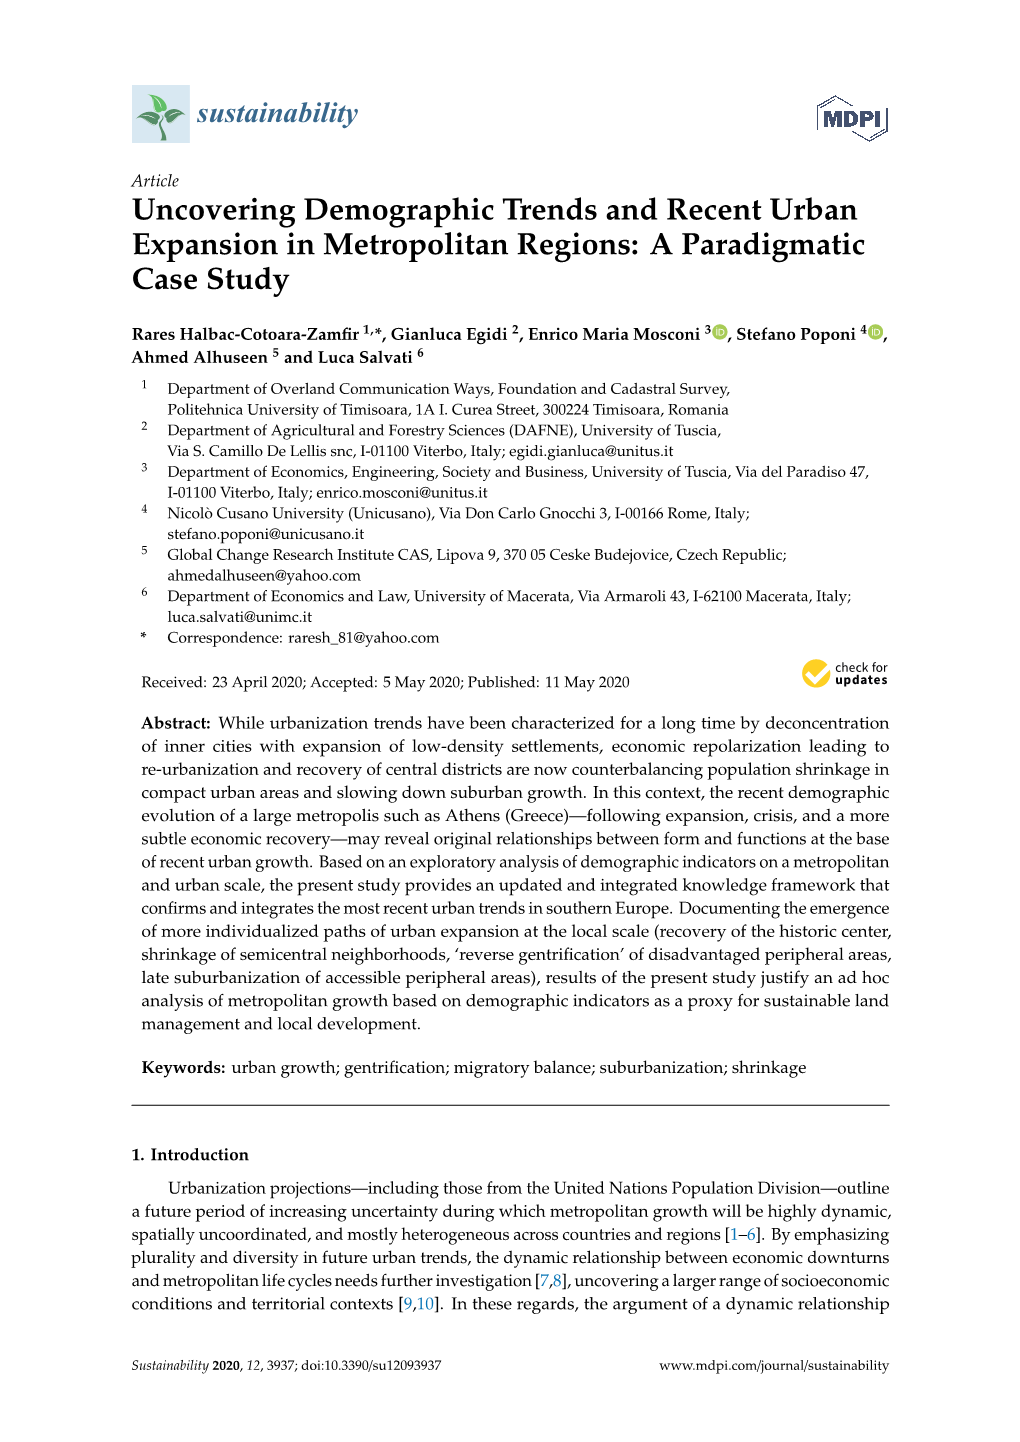 Uncovering Demographic Trends and Recent Urban Expansion in Metropolitan Regions: a Paradigmatic Case Study